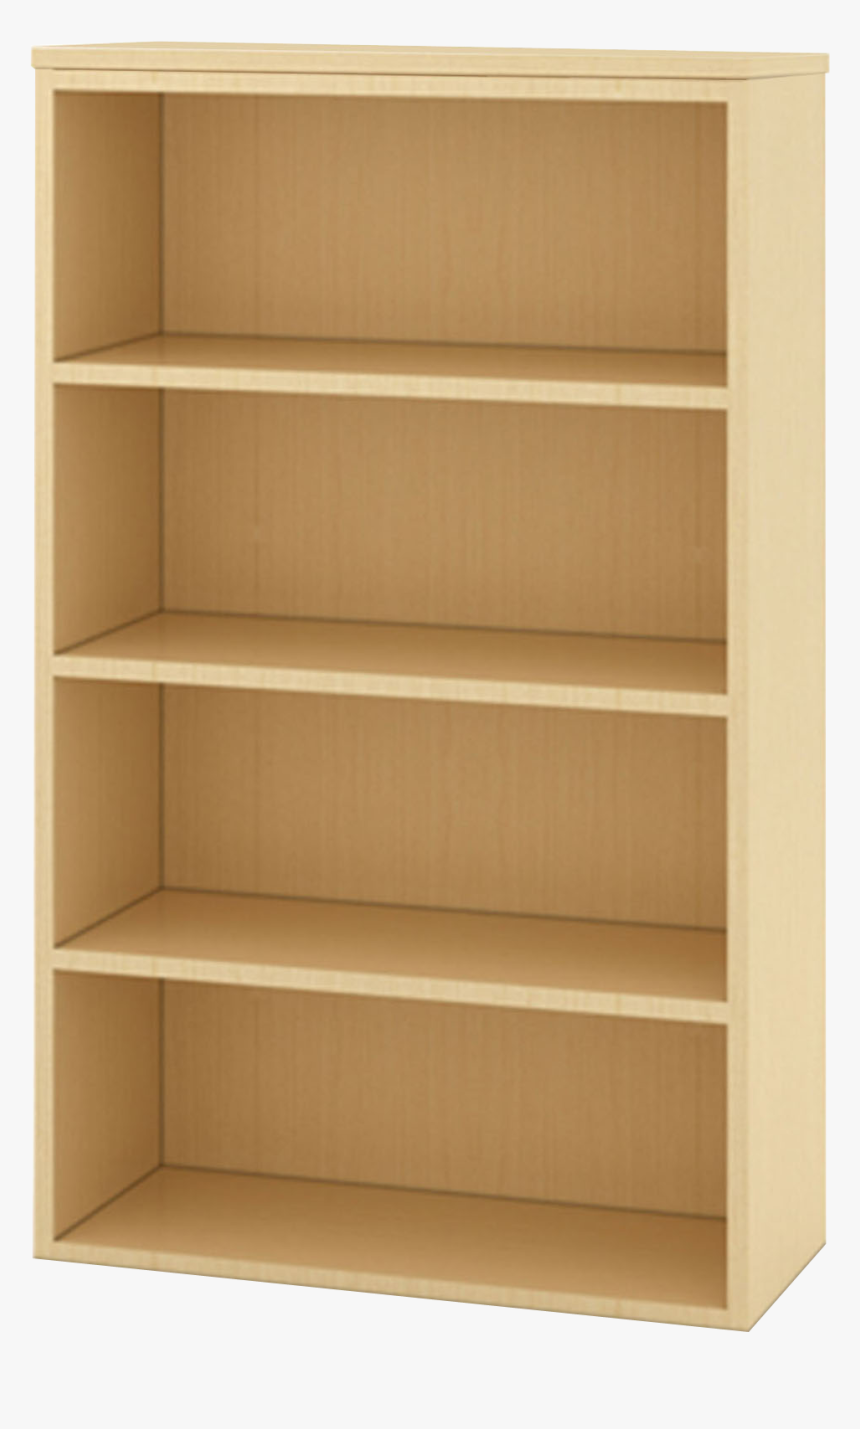 Currency 5 Shelf Bookcase - Simple Basic Bookshelf Designs, HD Png Download, Free Download